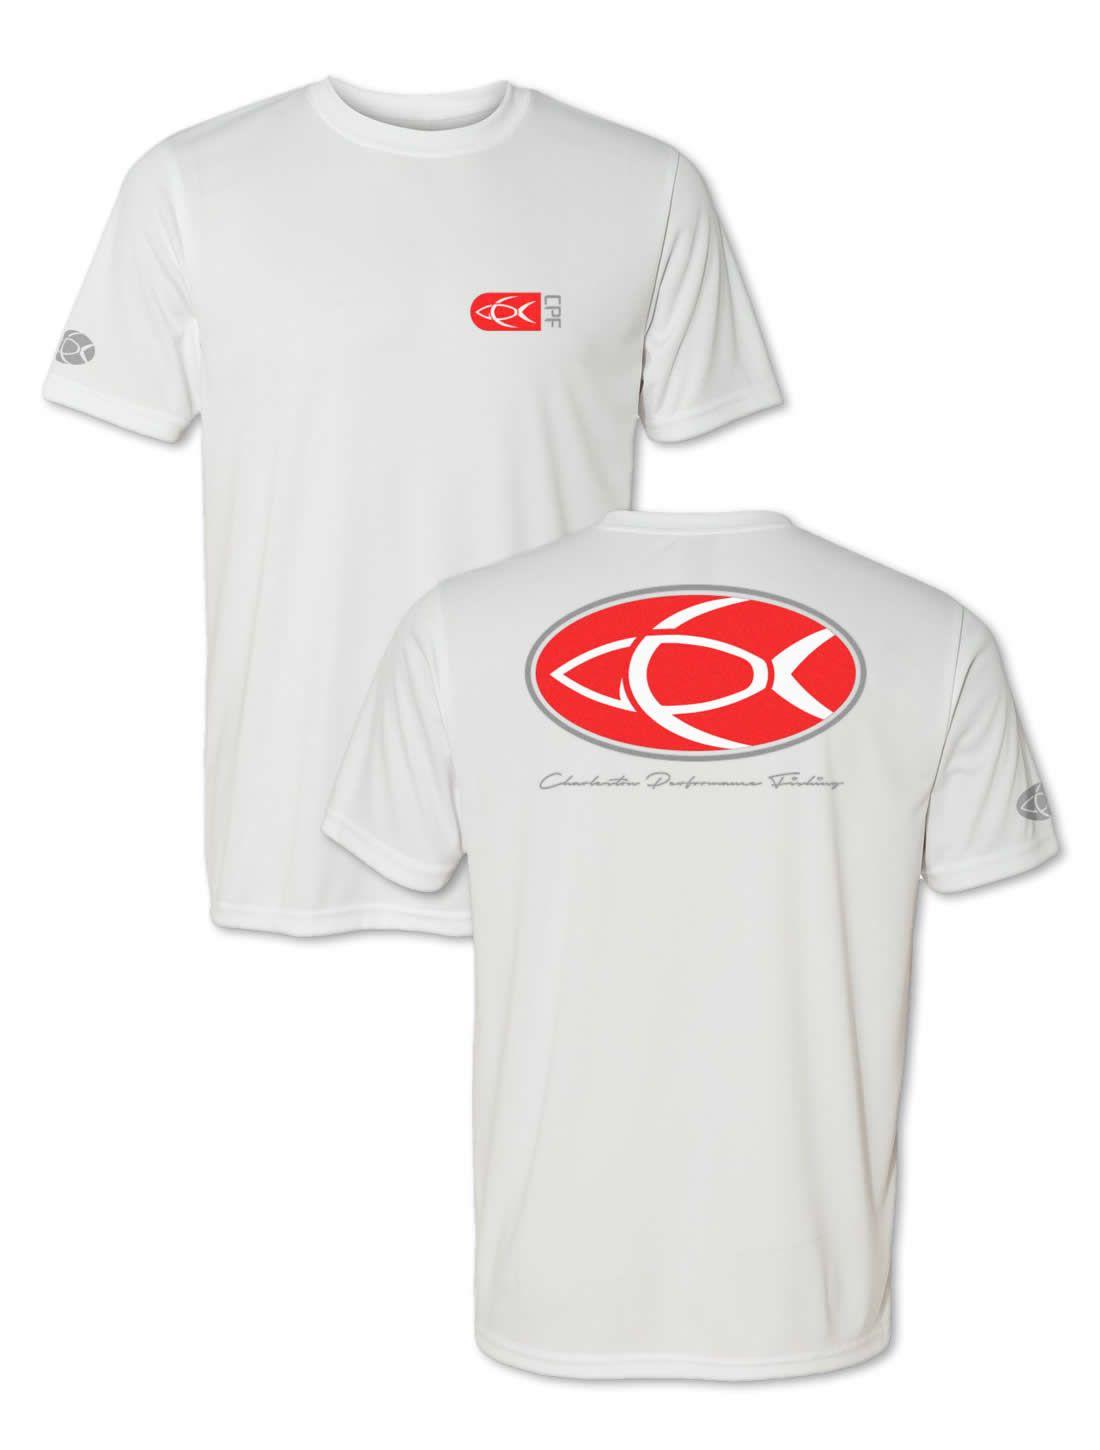 White with Red Oval Logo - Oval Back Red Graphic White Short Sleeve Performance Fishing Shirt ...